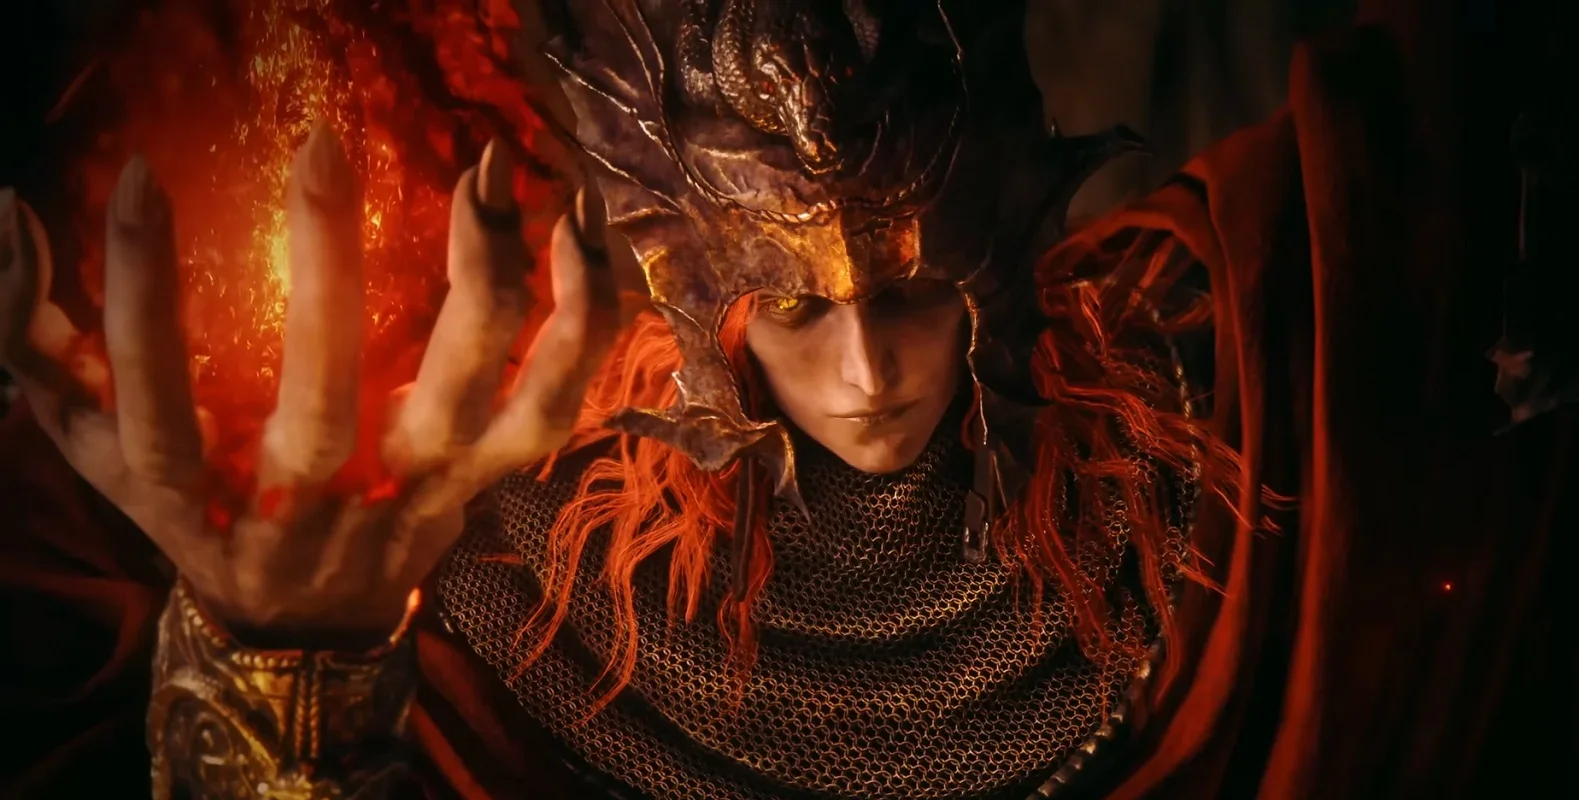 The main villain from the Elden Ring DLC is shown in detail